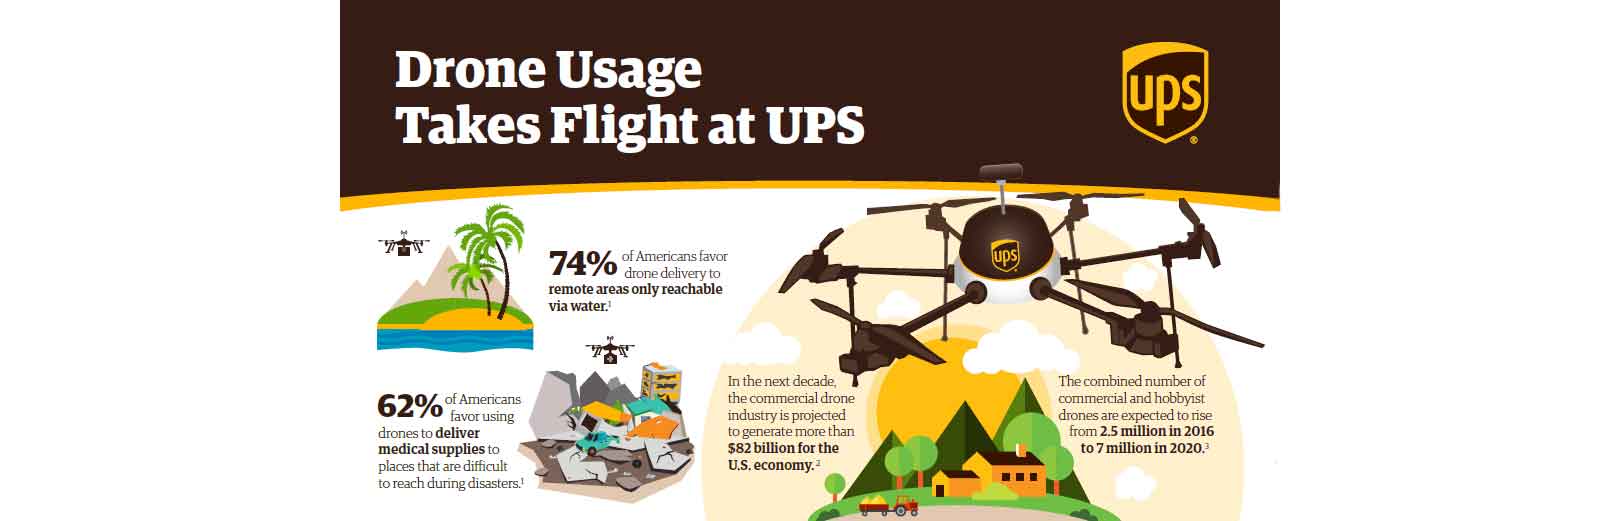 UPS delivery drones being testing in Florida